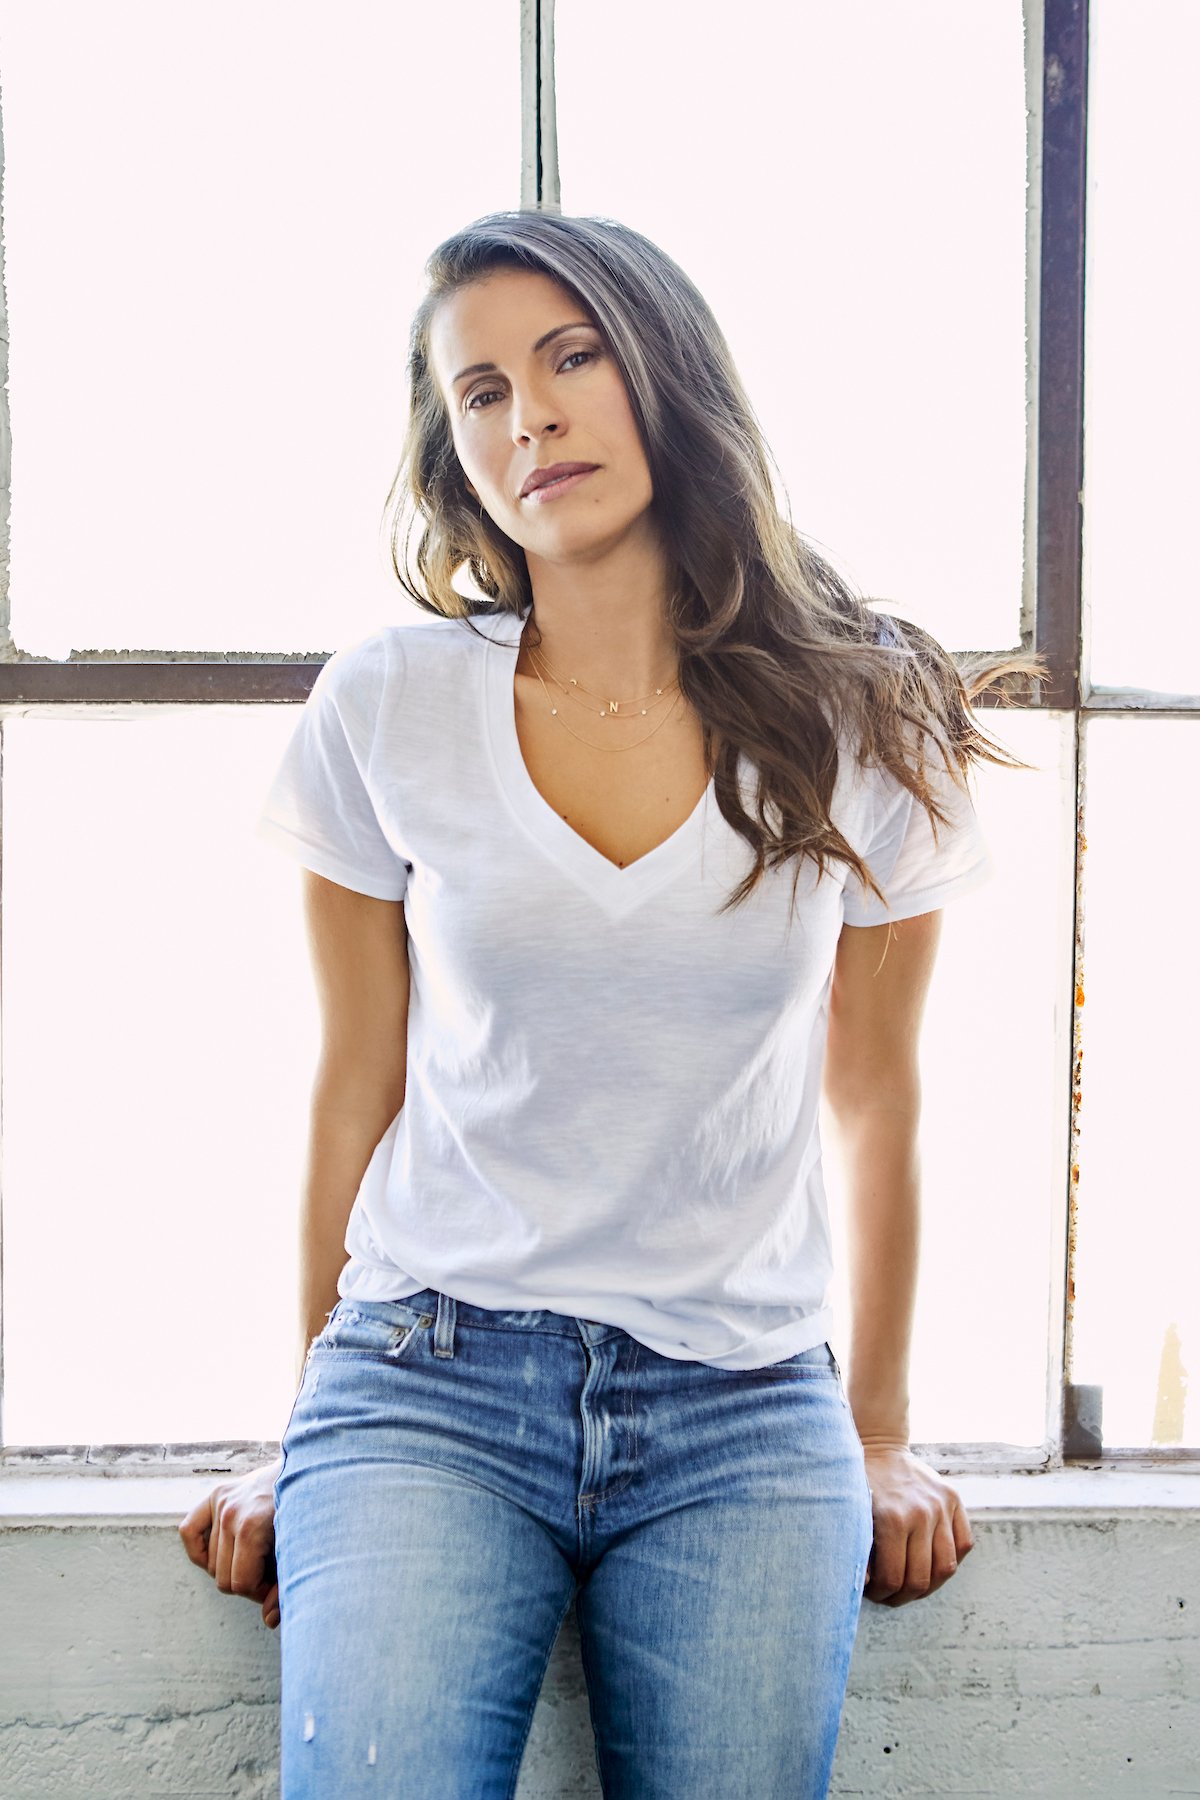 Natalia Castellanos wearing a white t-shirt in front of a window